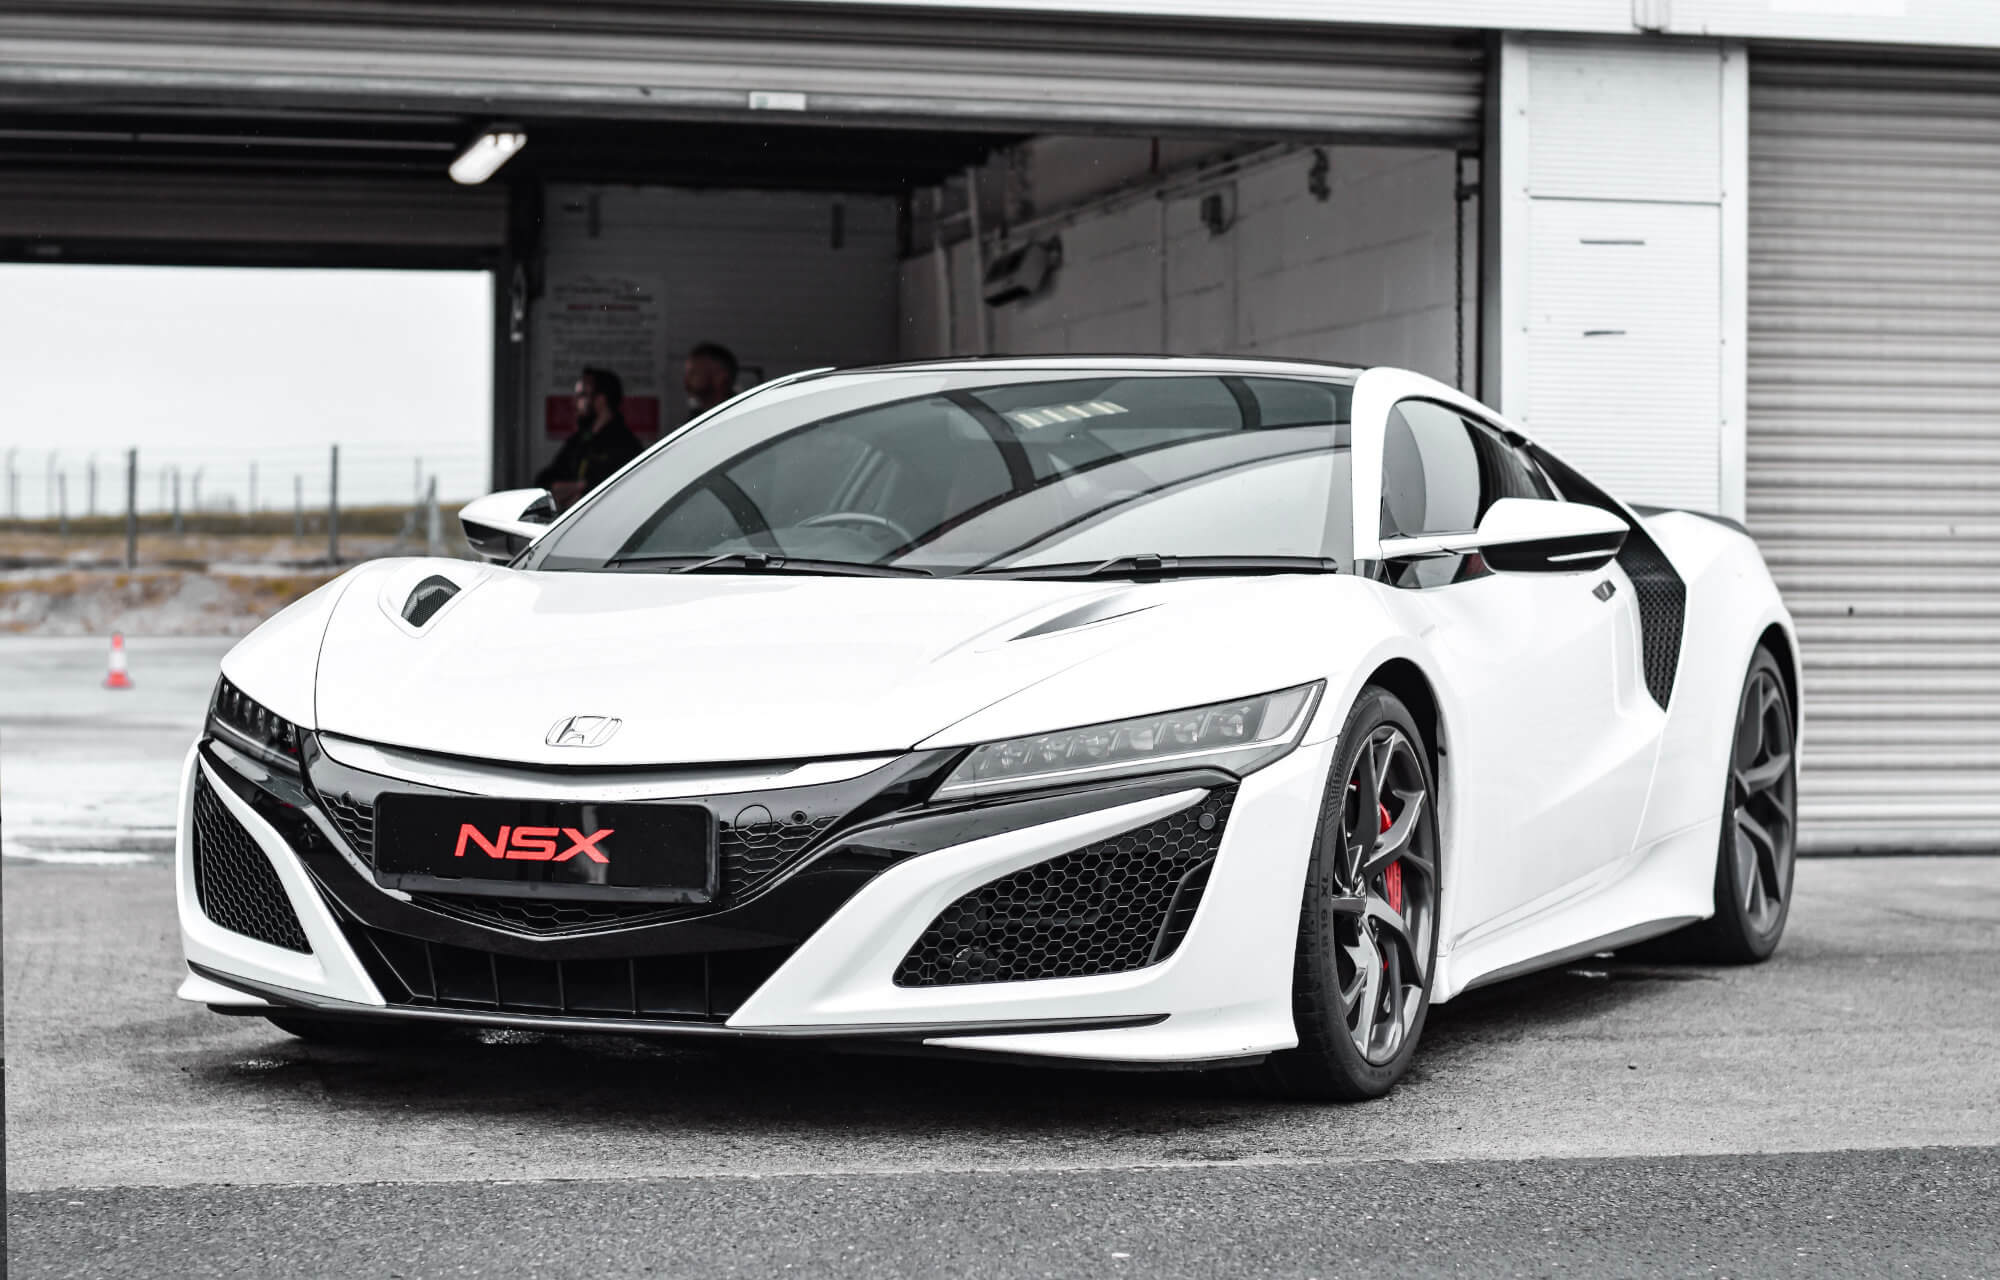 Honda at Mondello Race Track with the NSX and Civic Type R